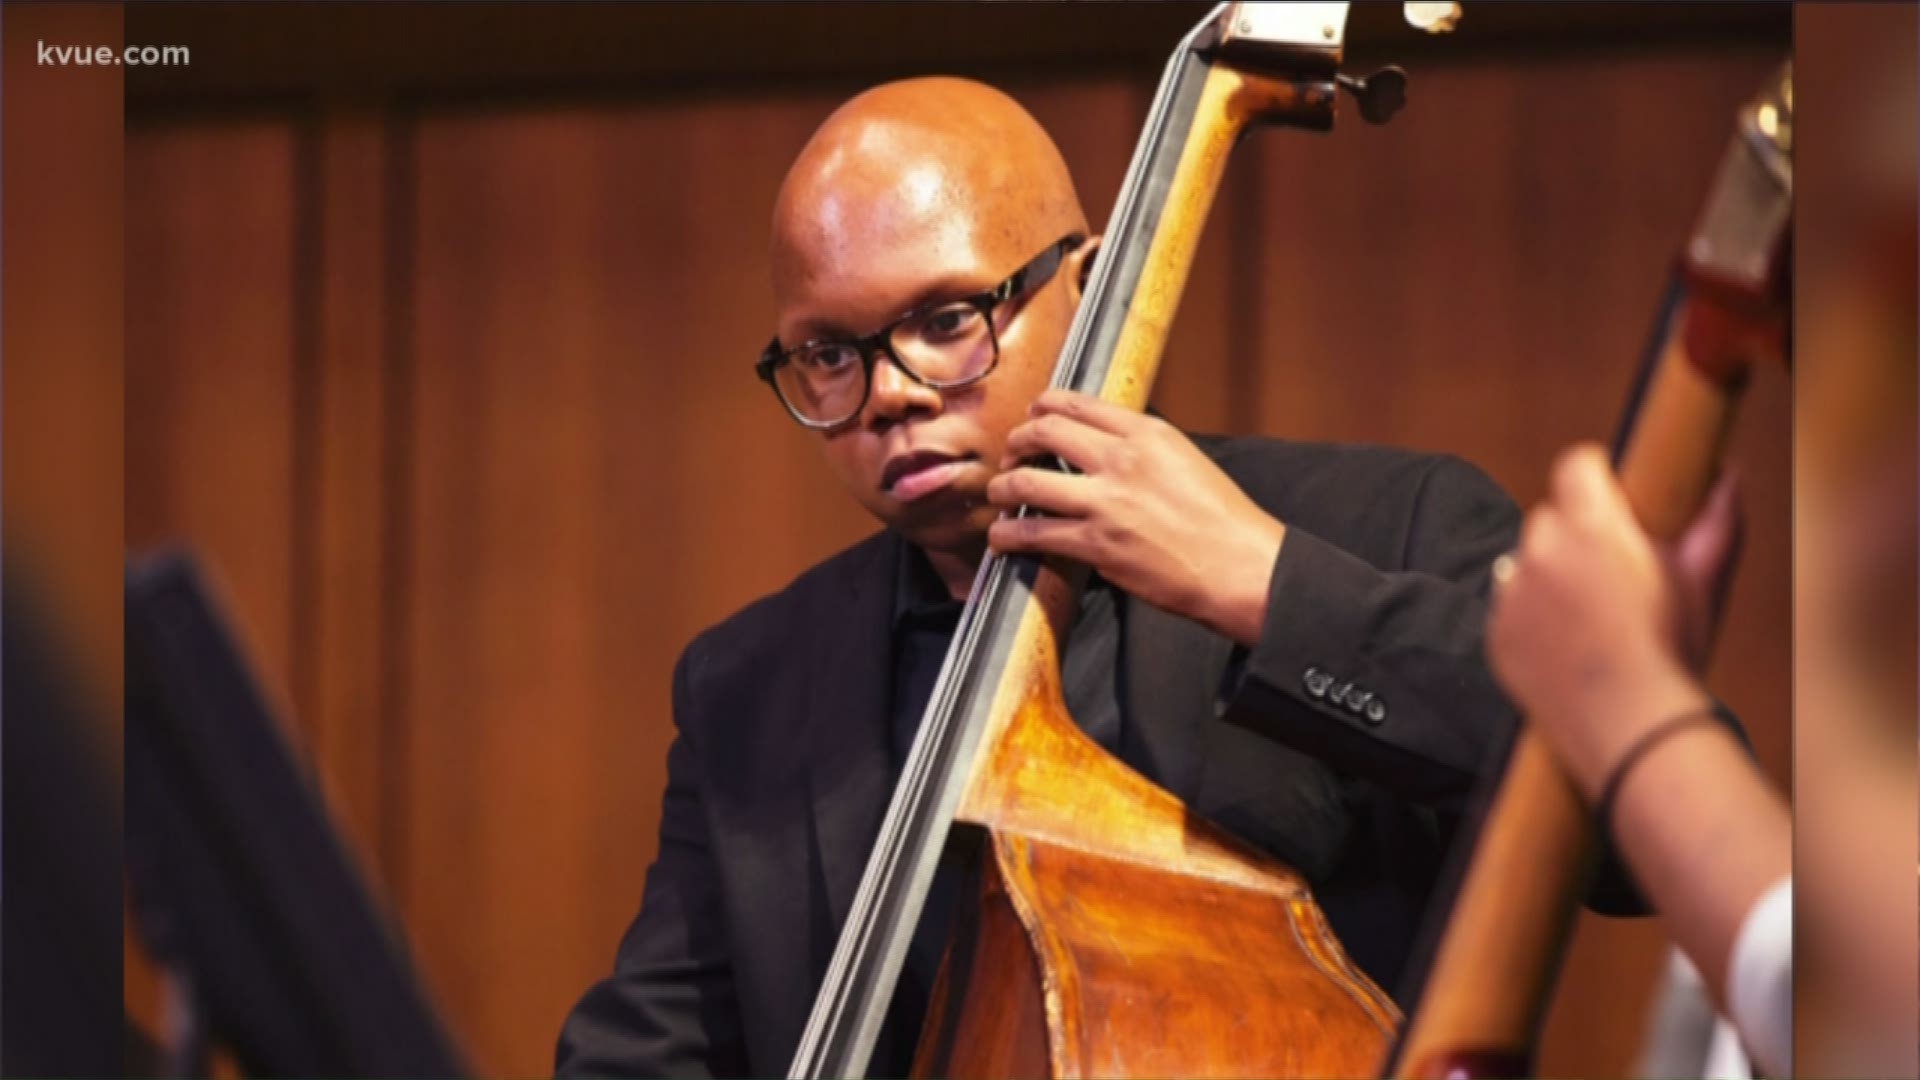 Classical radio station KMFA announced it will name a new studio after Draylen Mason, who died in March 2018.